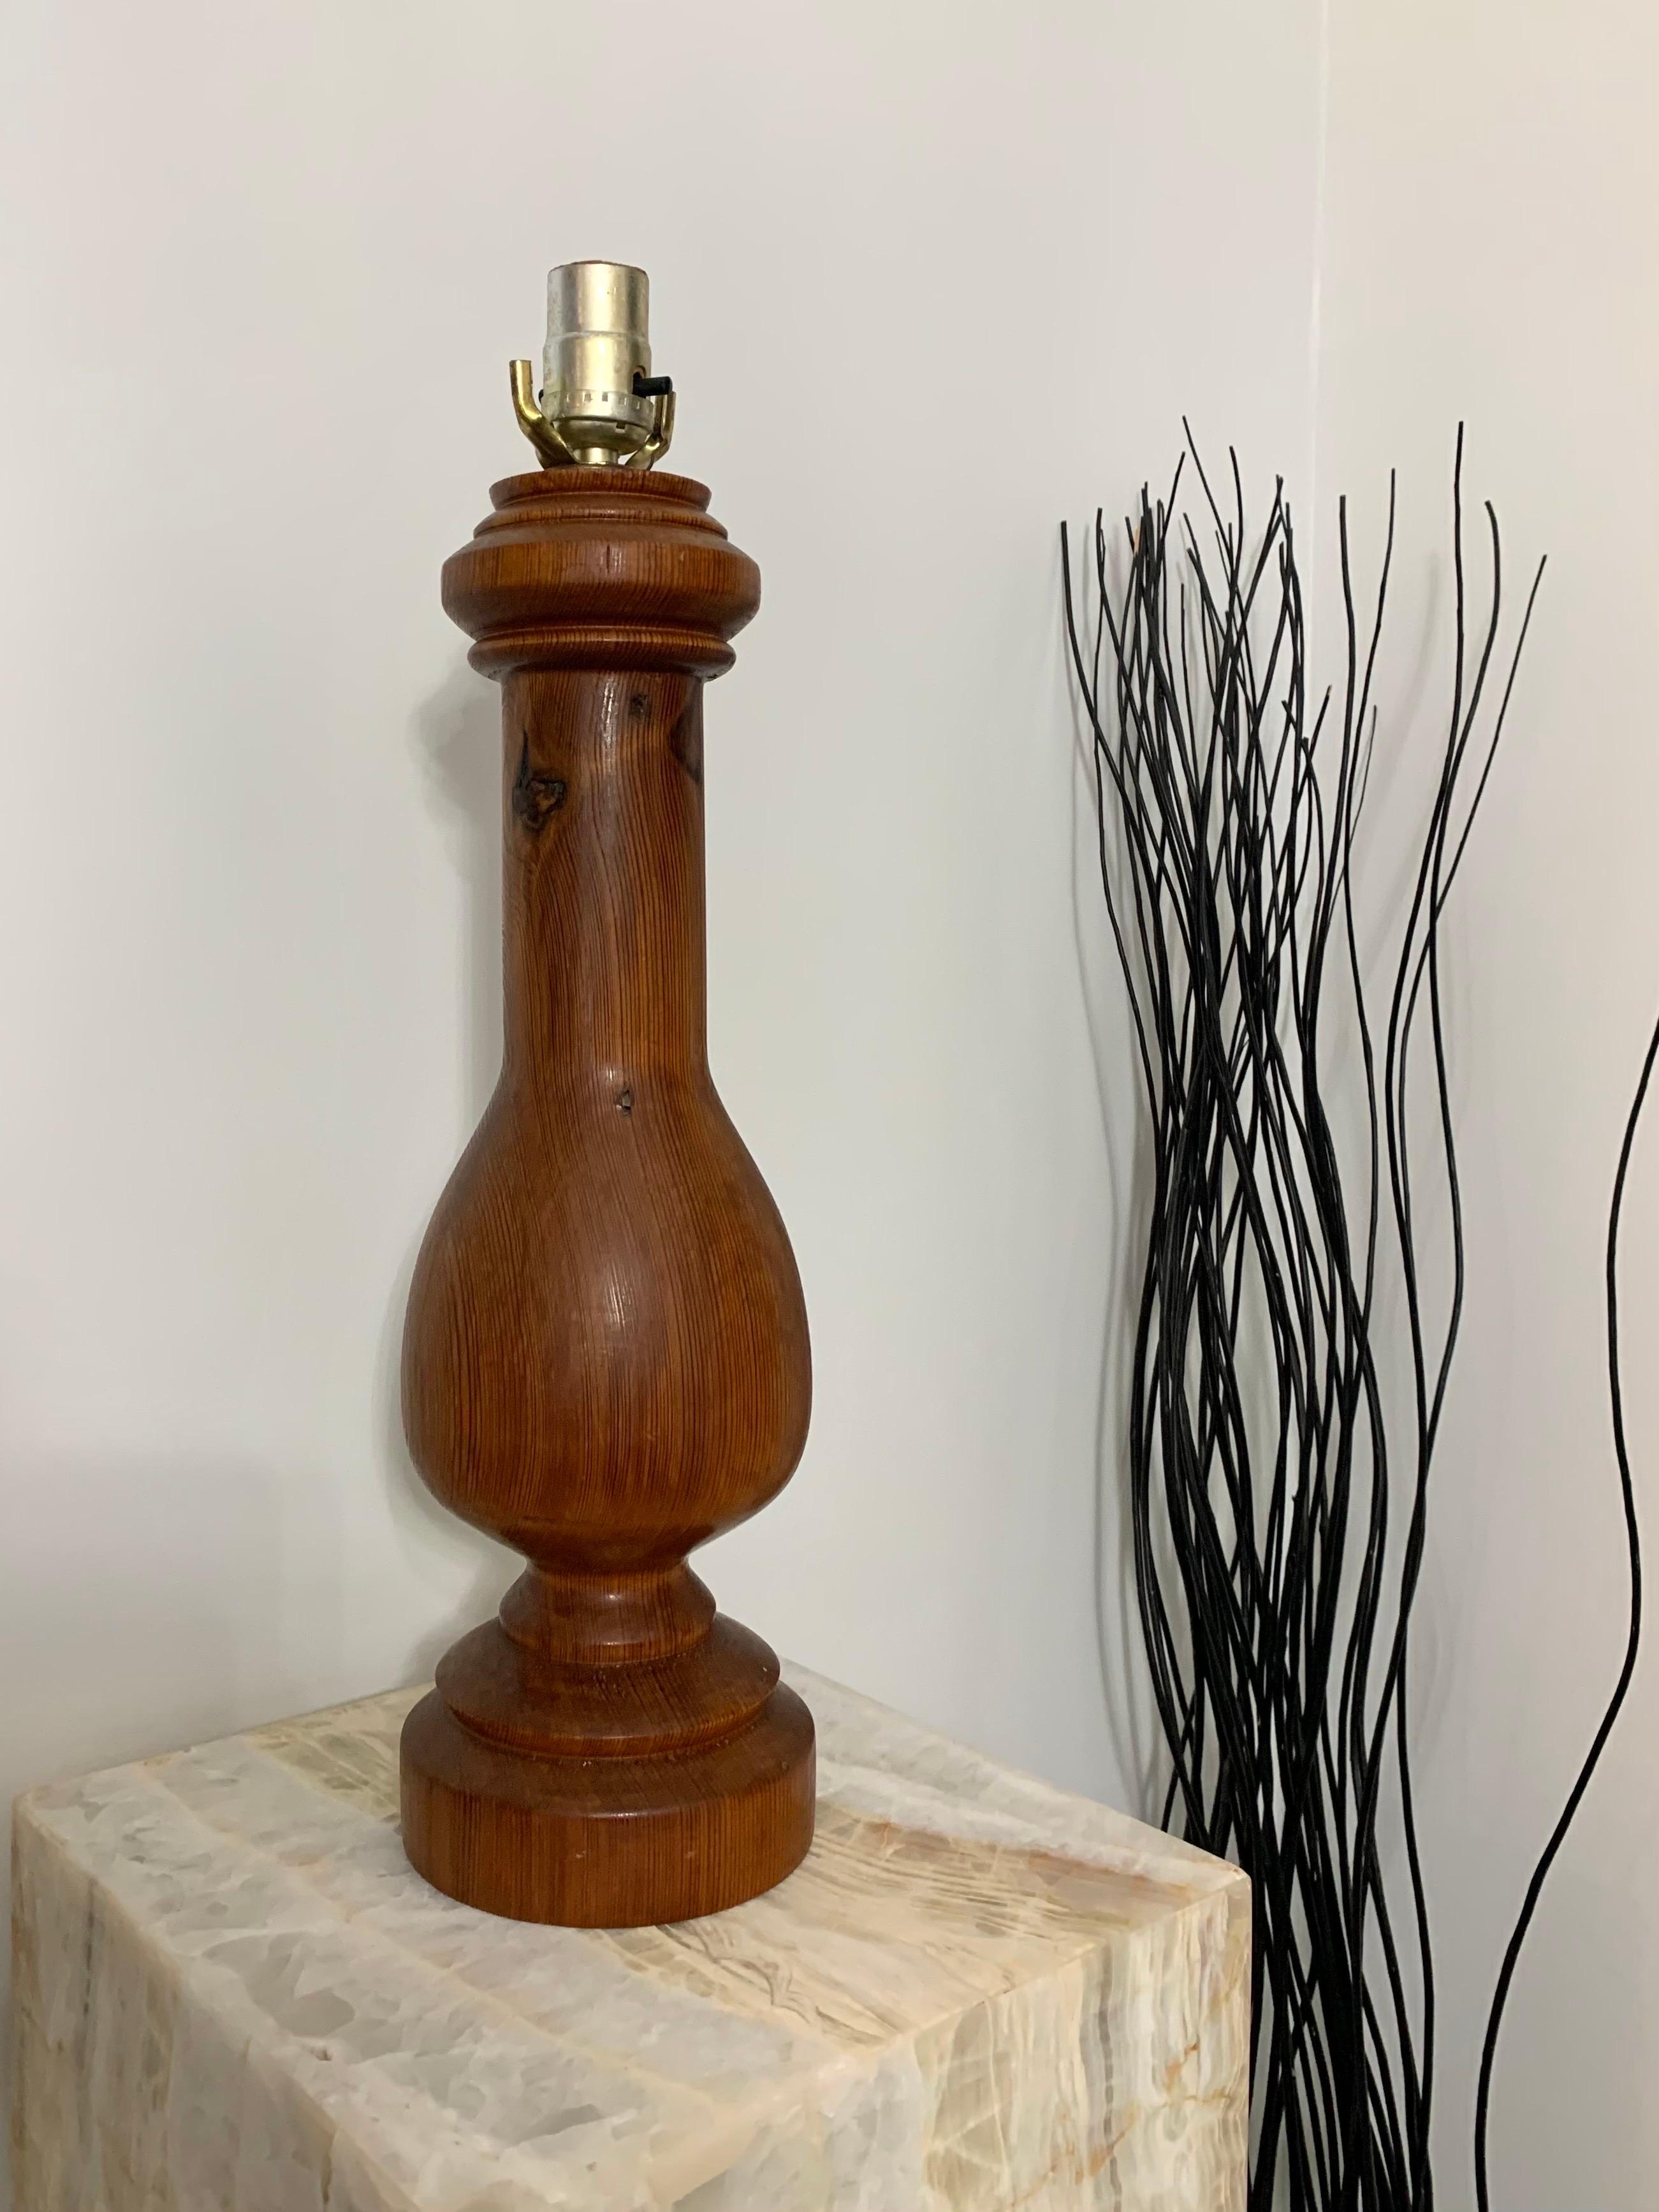 A table lamp. In finely turned reclaimed oak in a classic form. Designed and produced by an unknown studio craftsman who signed THP. Made in 1977. Beautiful patina to the wood and brass. 

Has remnants of its past life with old nail holes and one